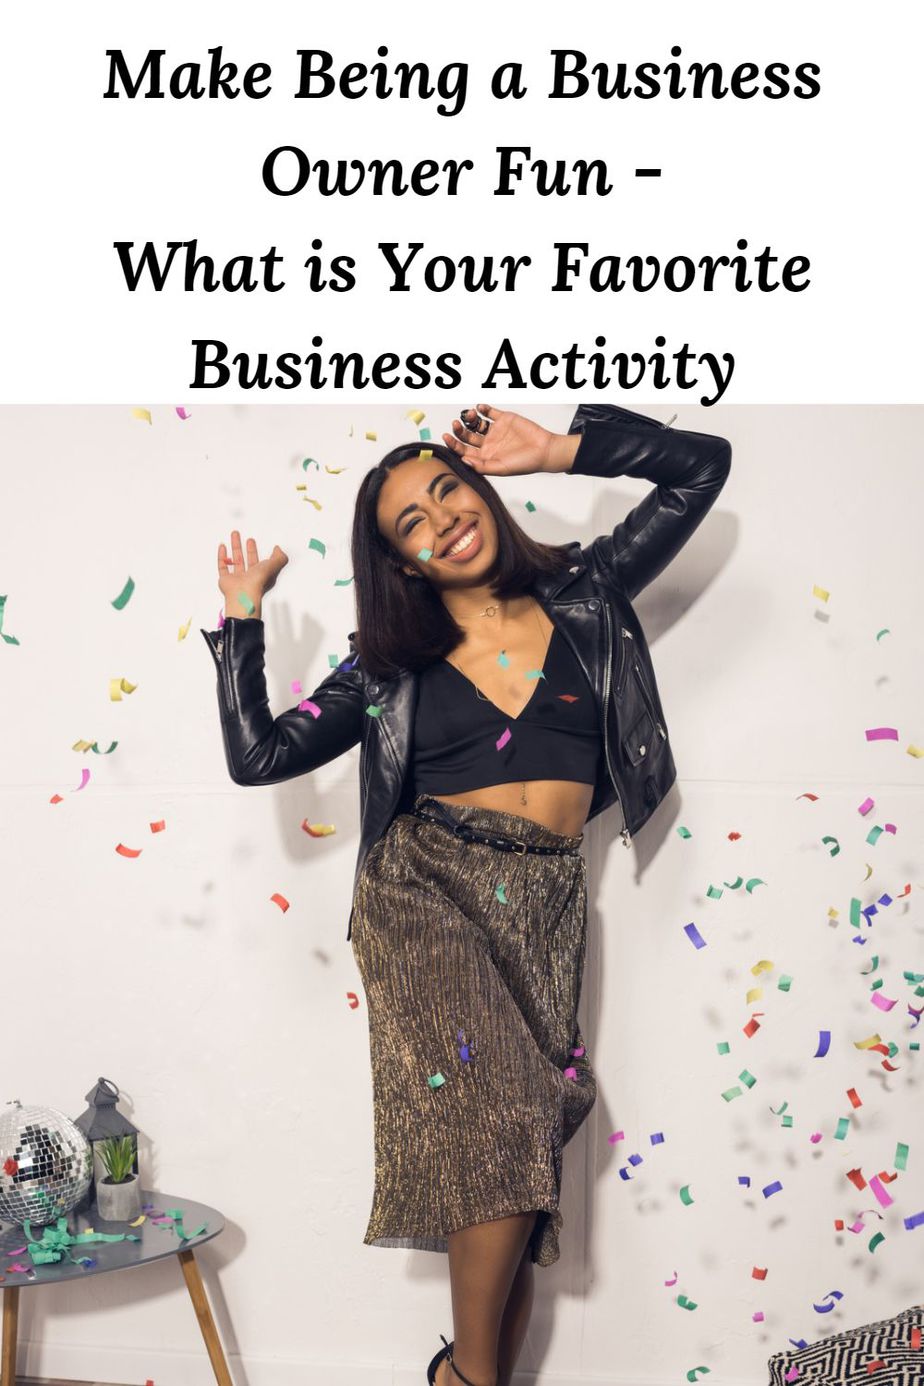 Make Being a Business Owner Fun -What is Your Favorite Business Activity